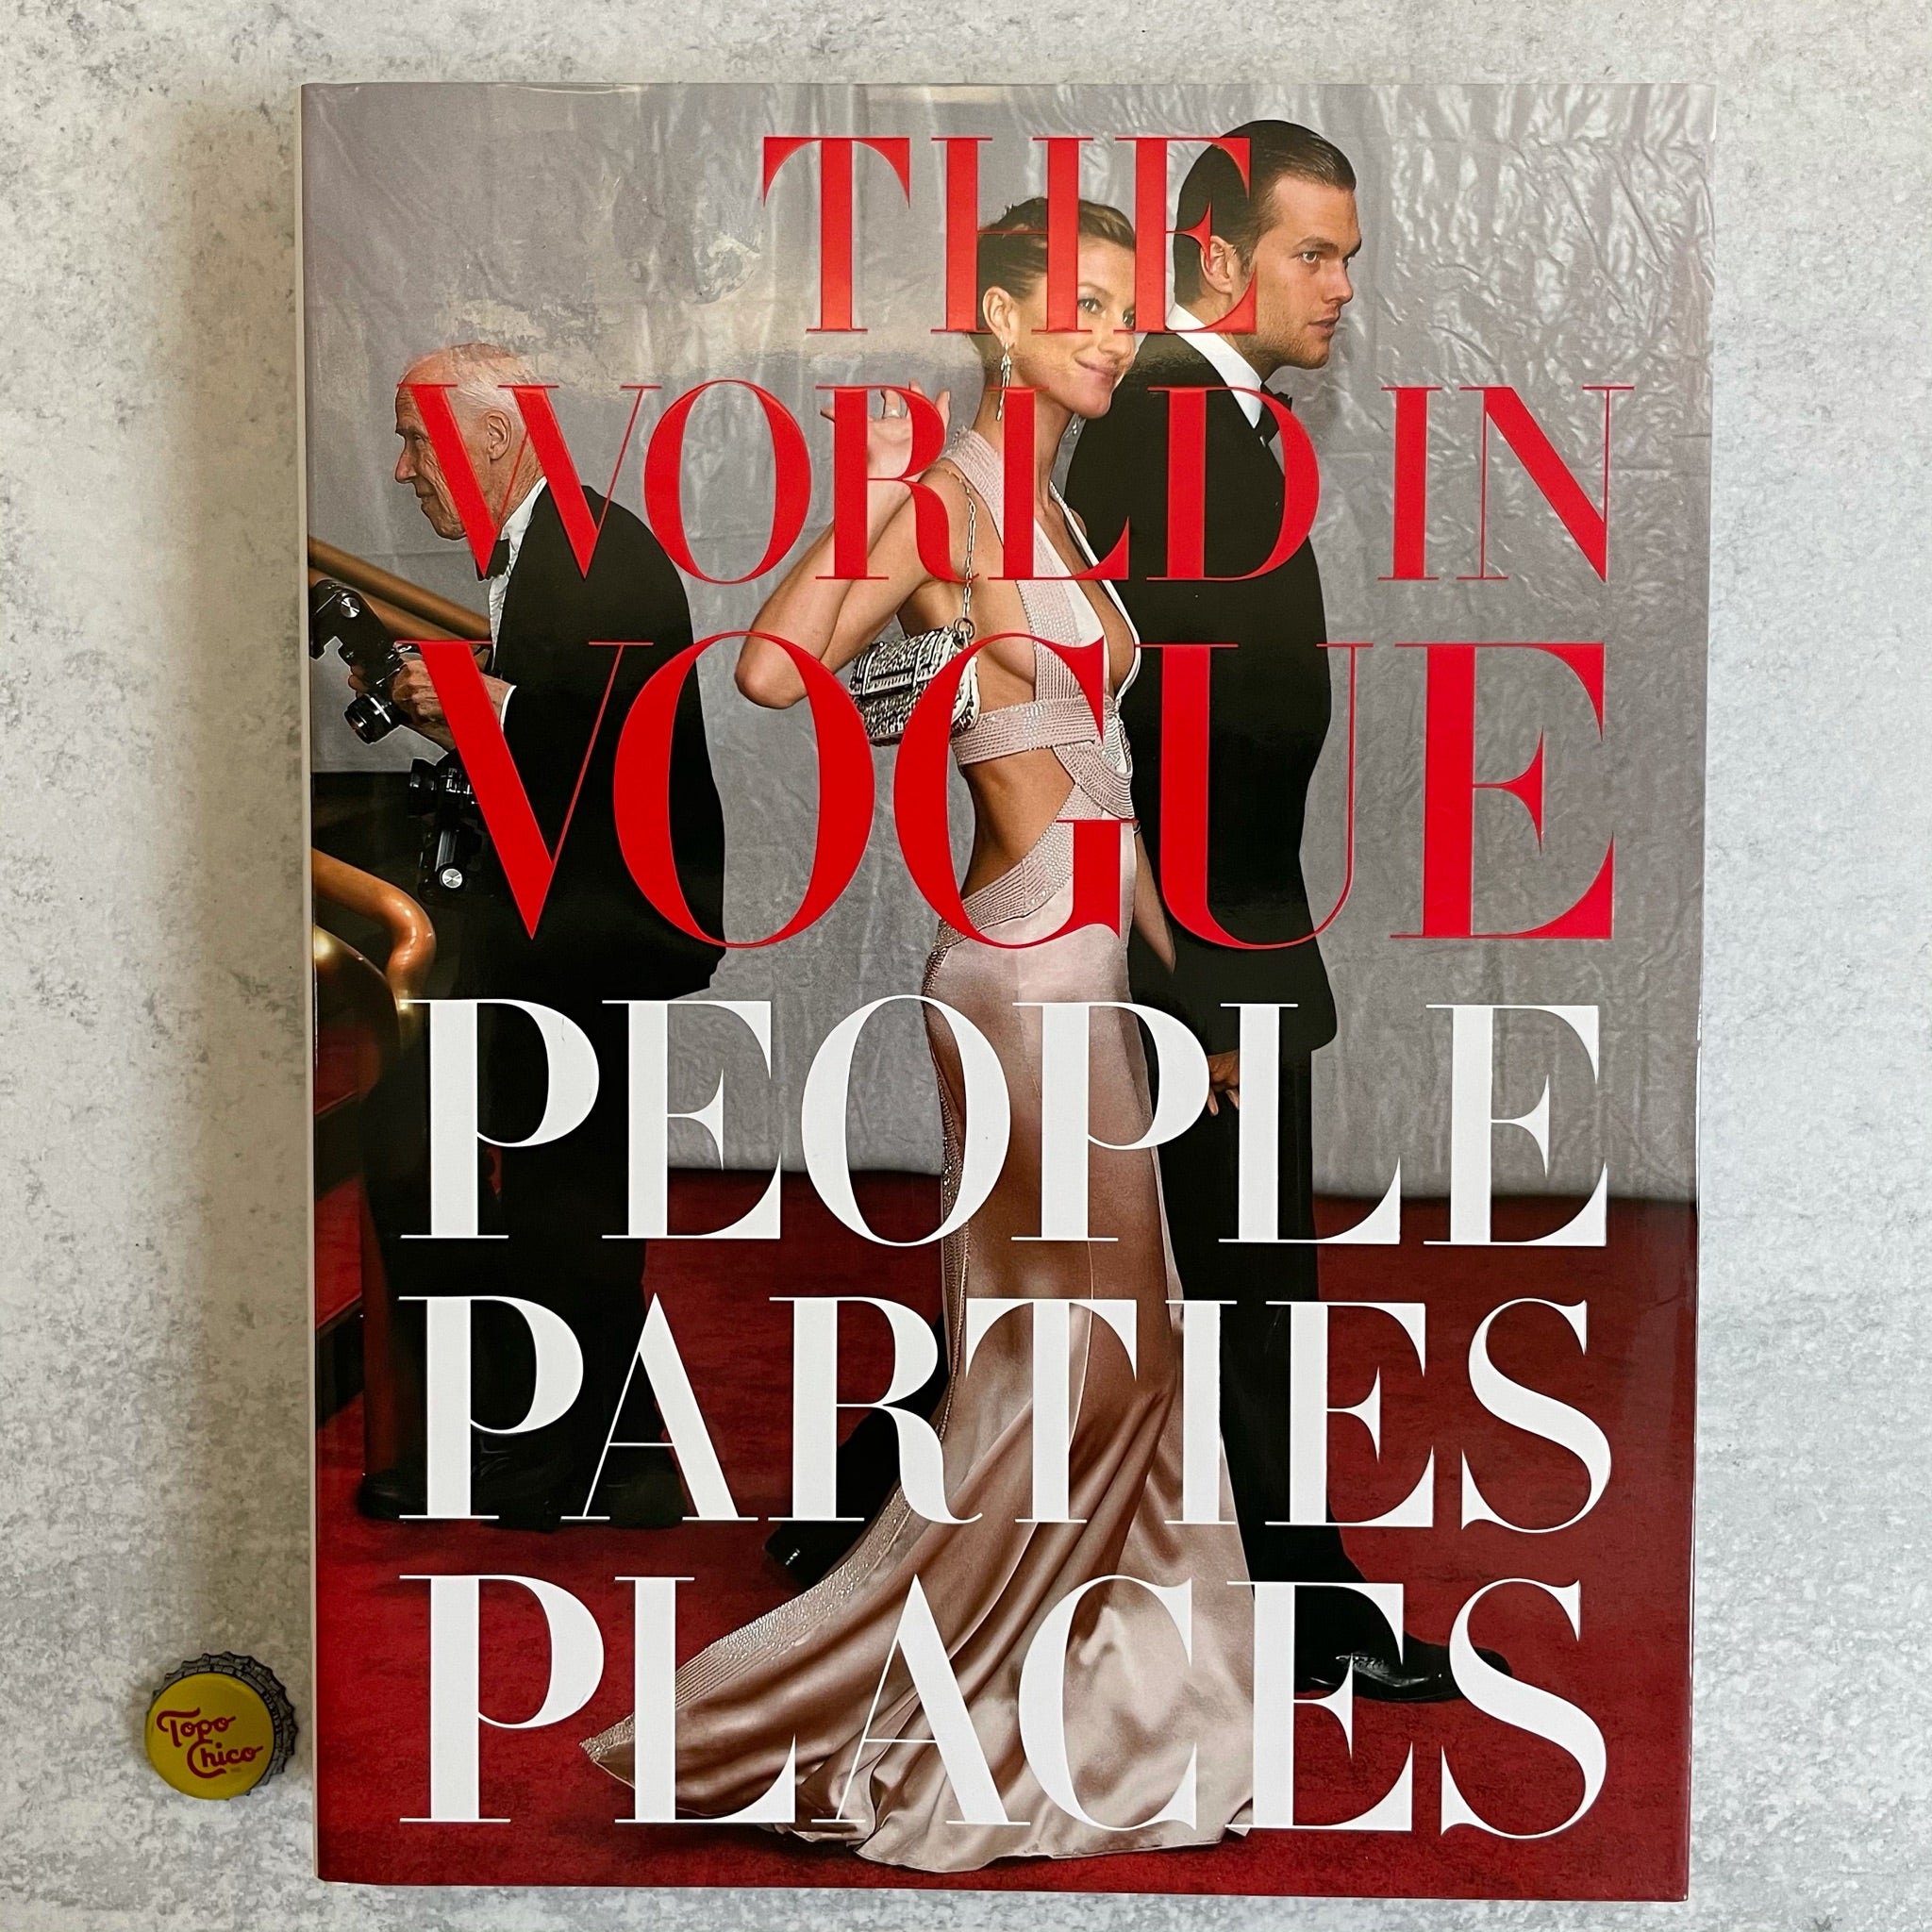 The World in Vogue Book